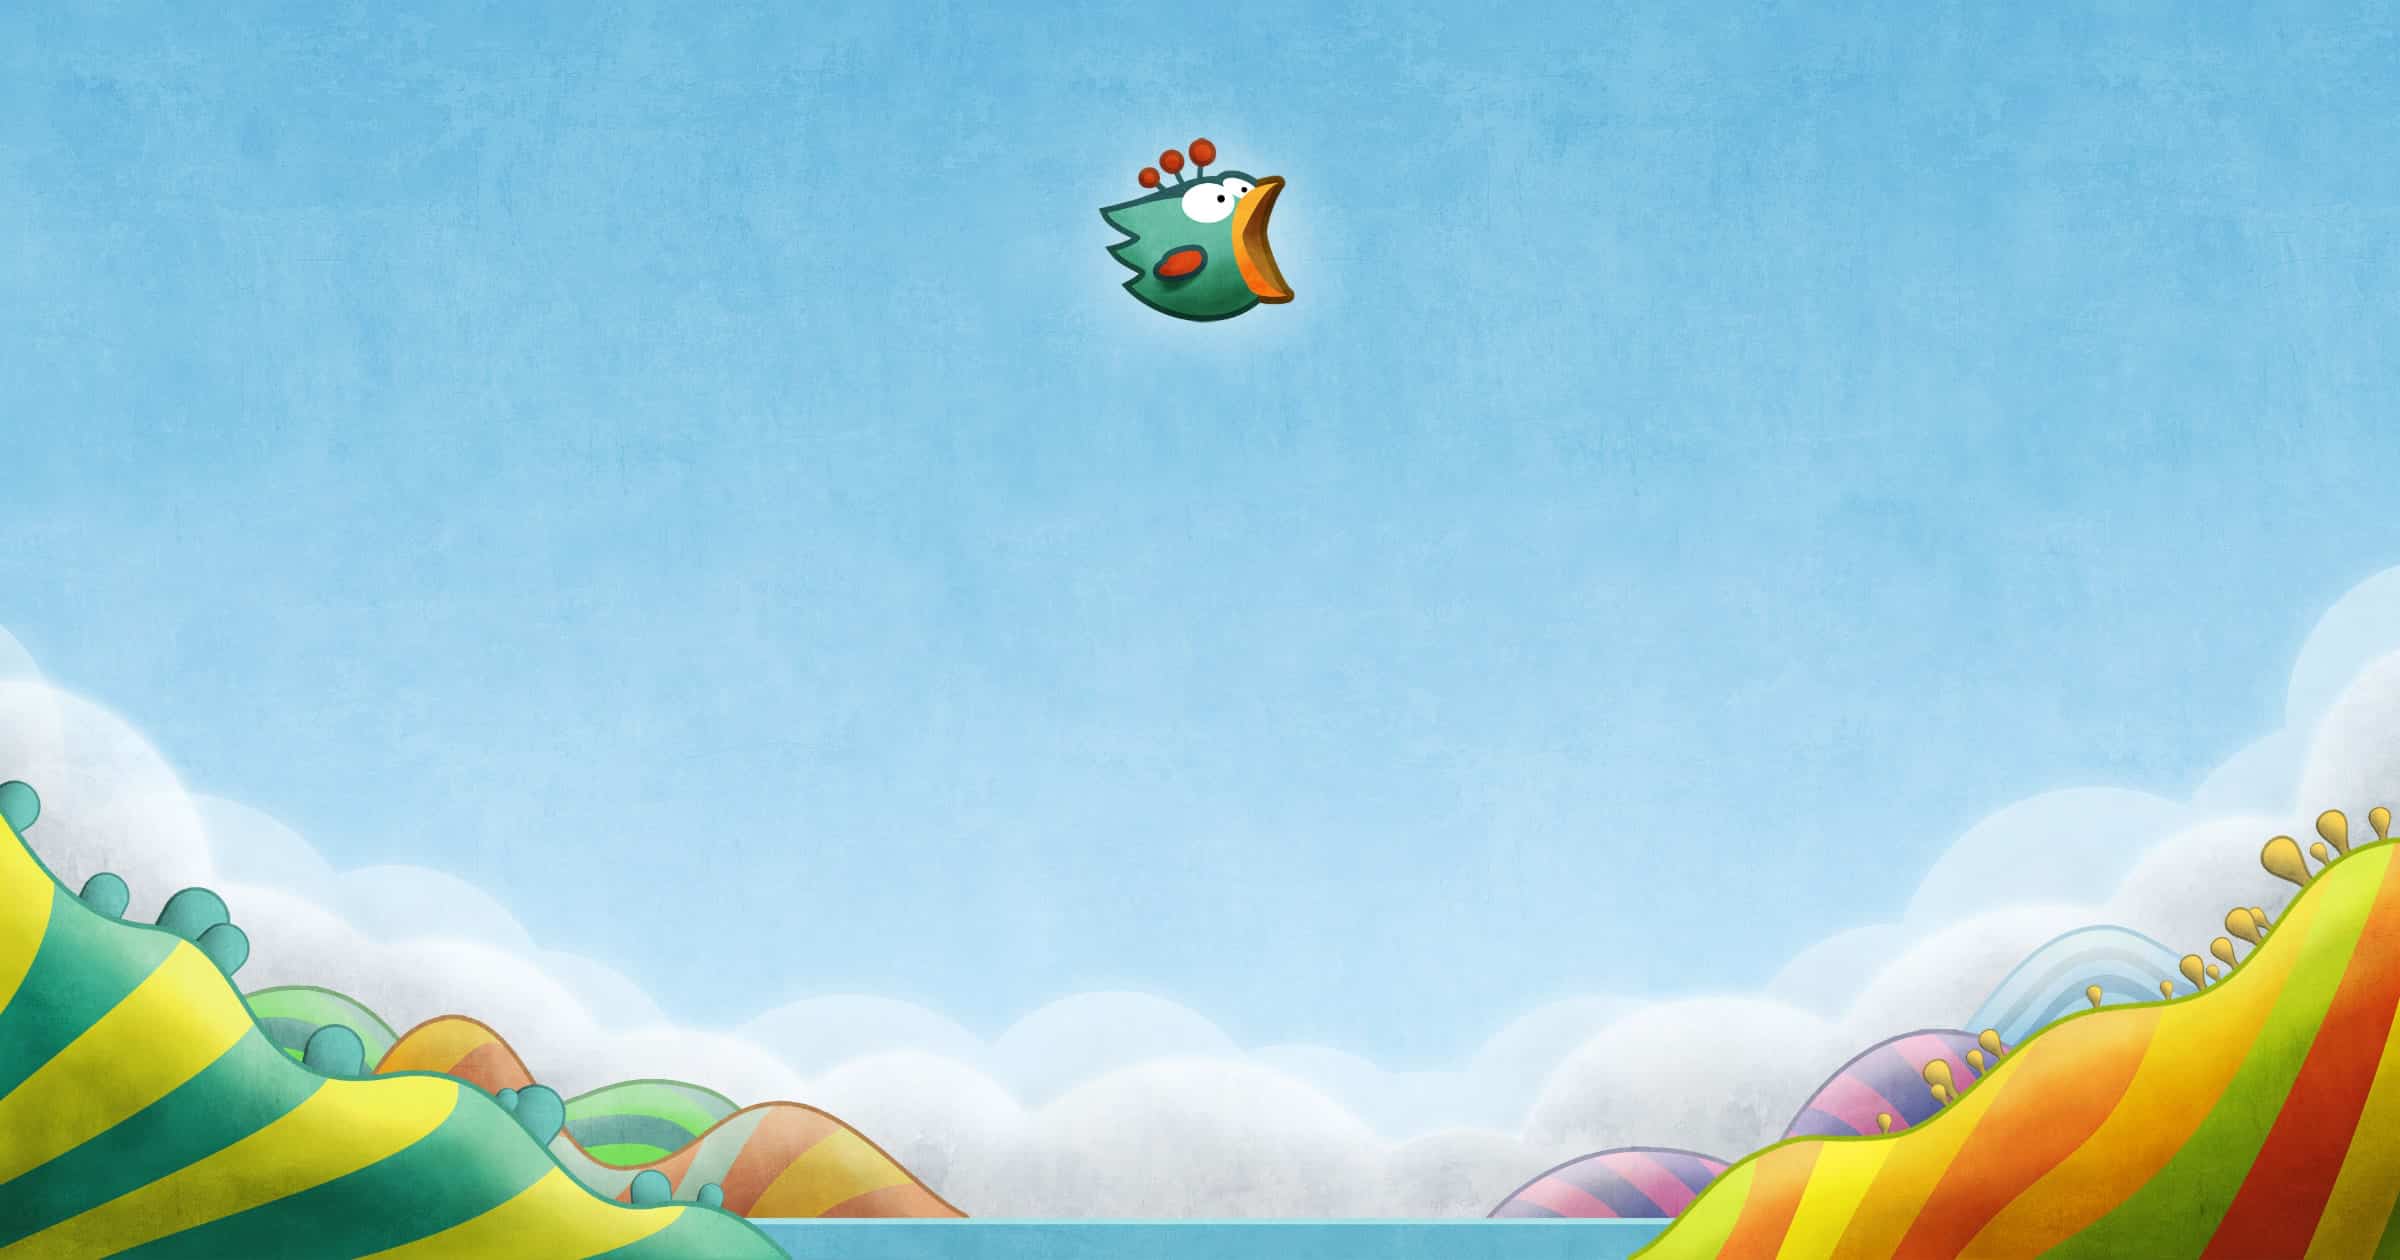 New on Apple Arcade: ‘Tiny Wings+’ Flying Game